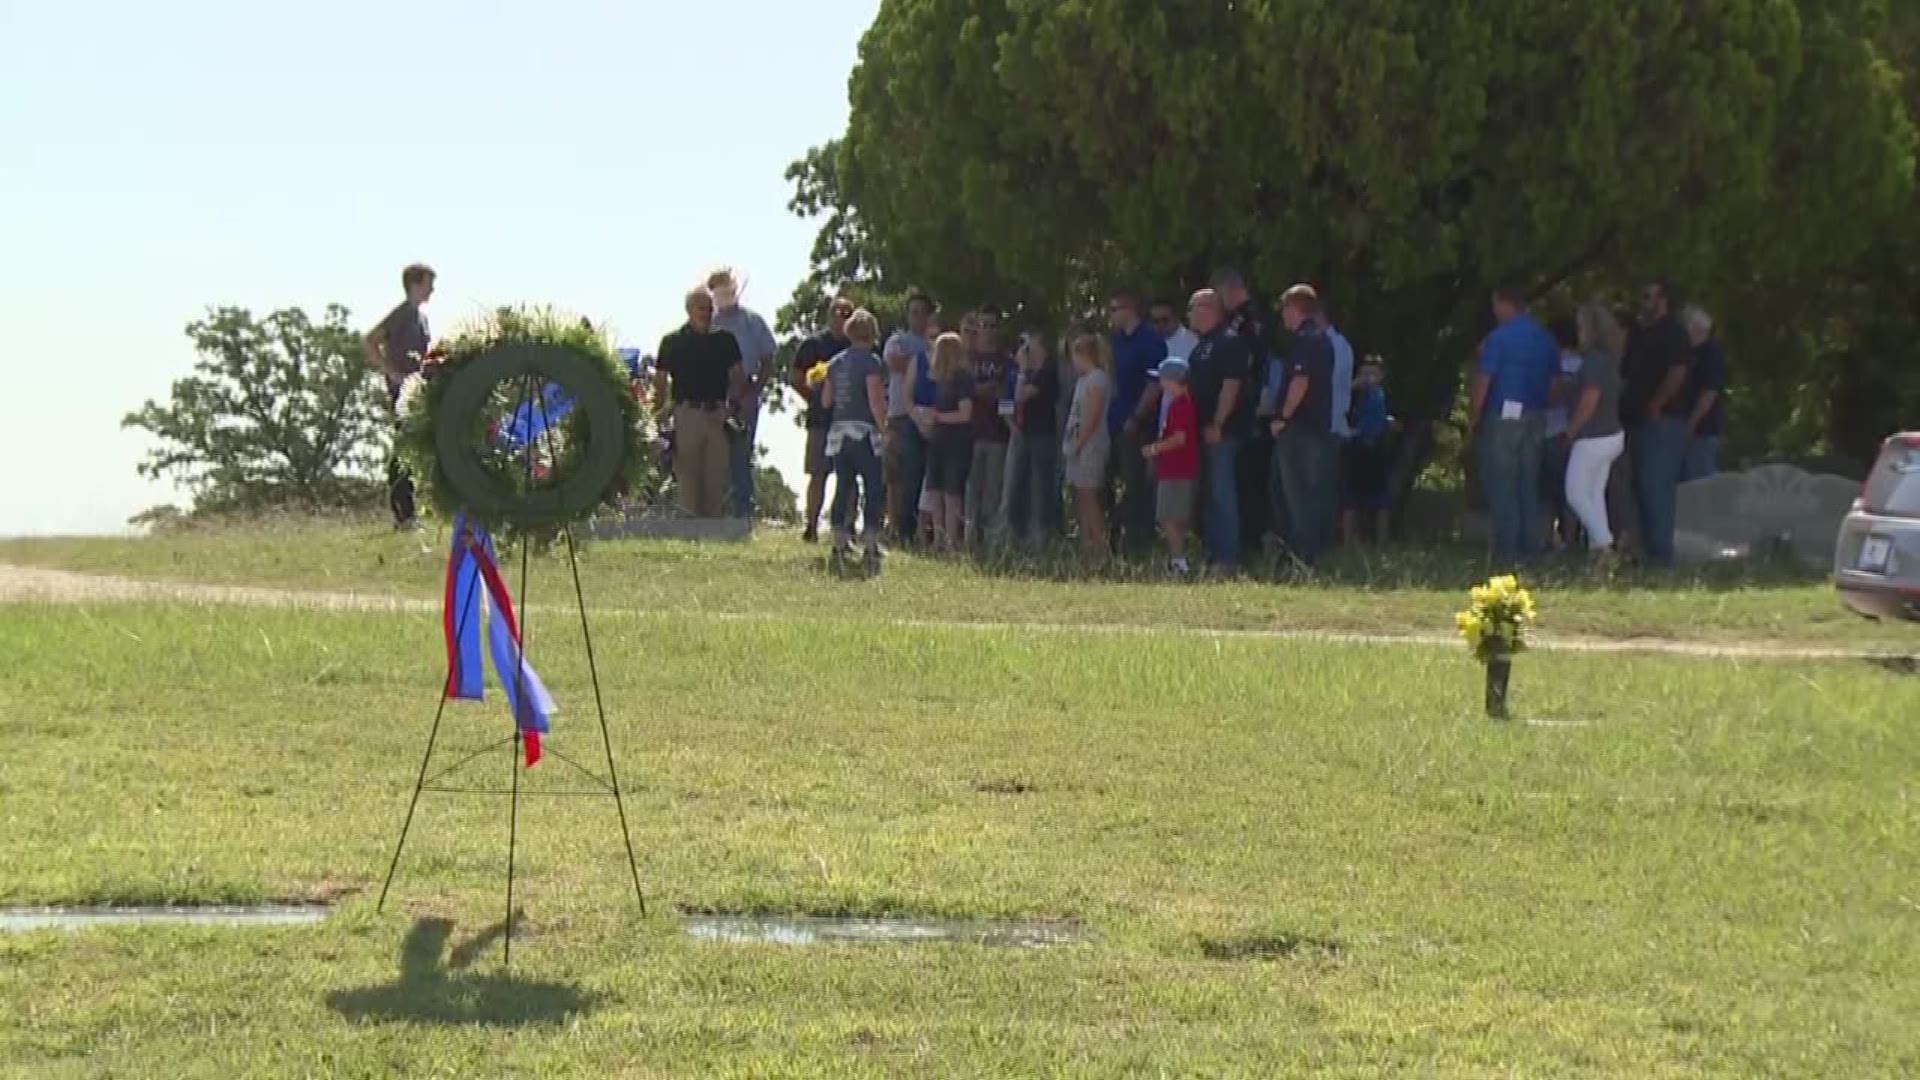 Widow of Plano officer remembers the fallen